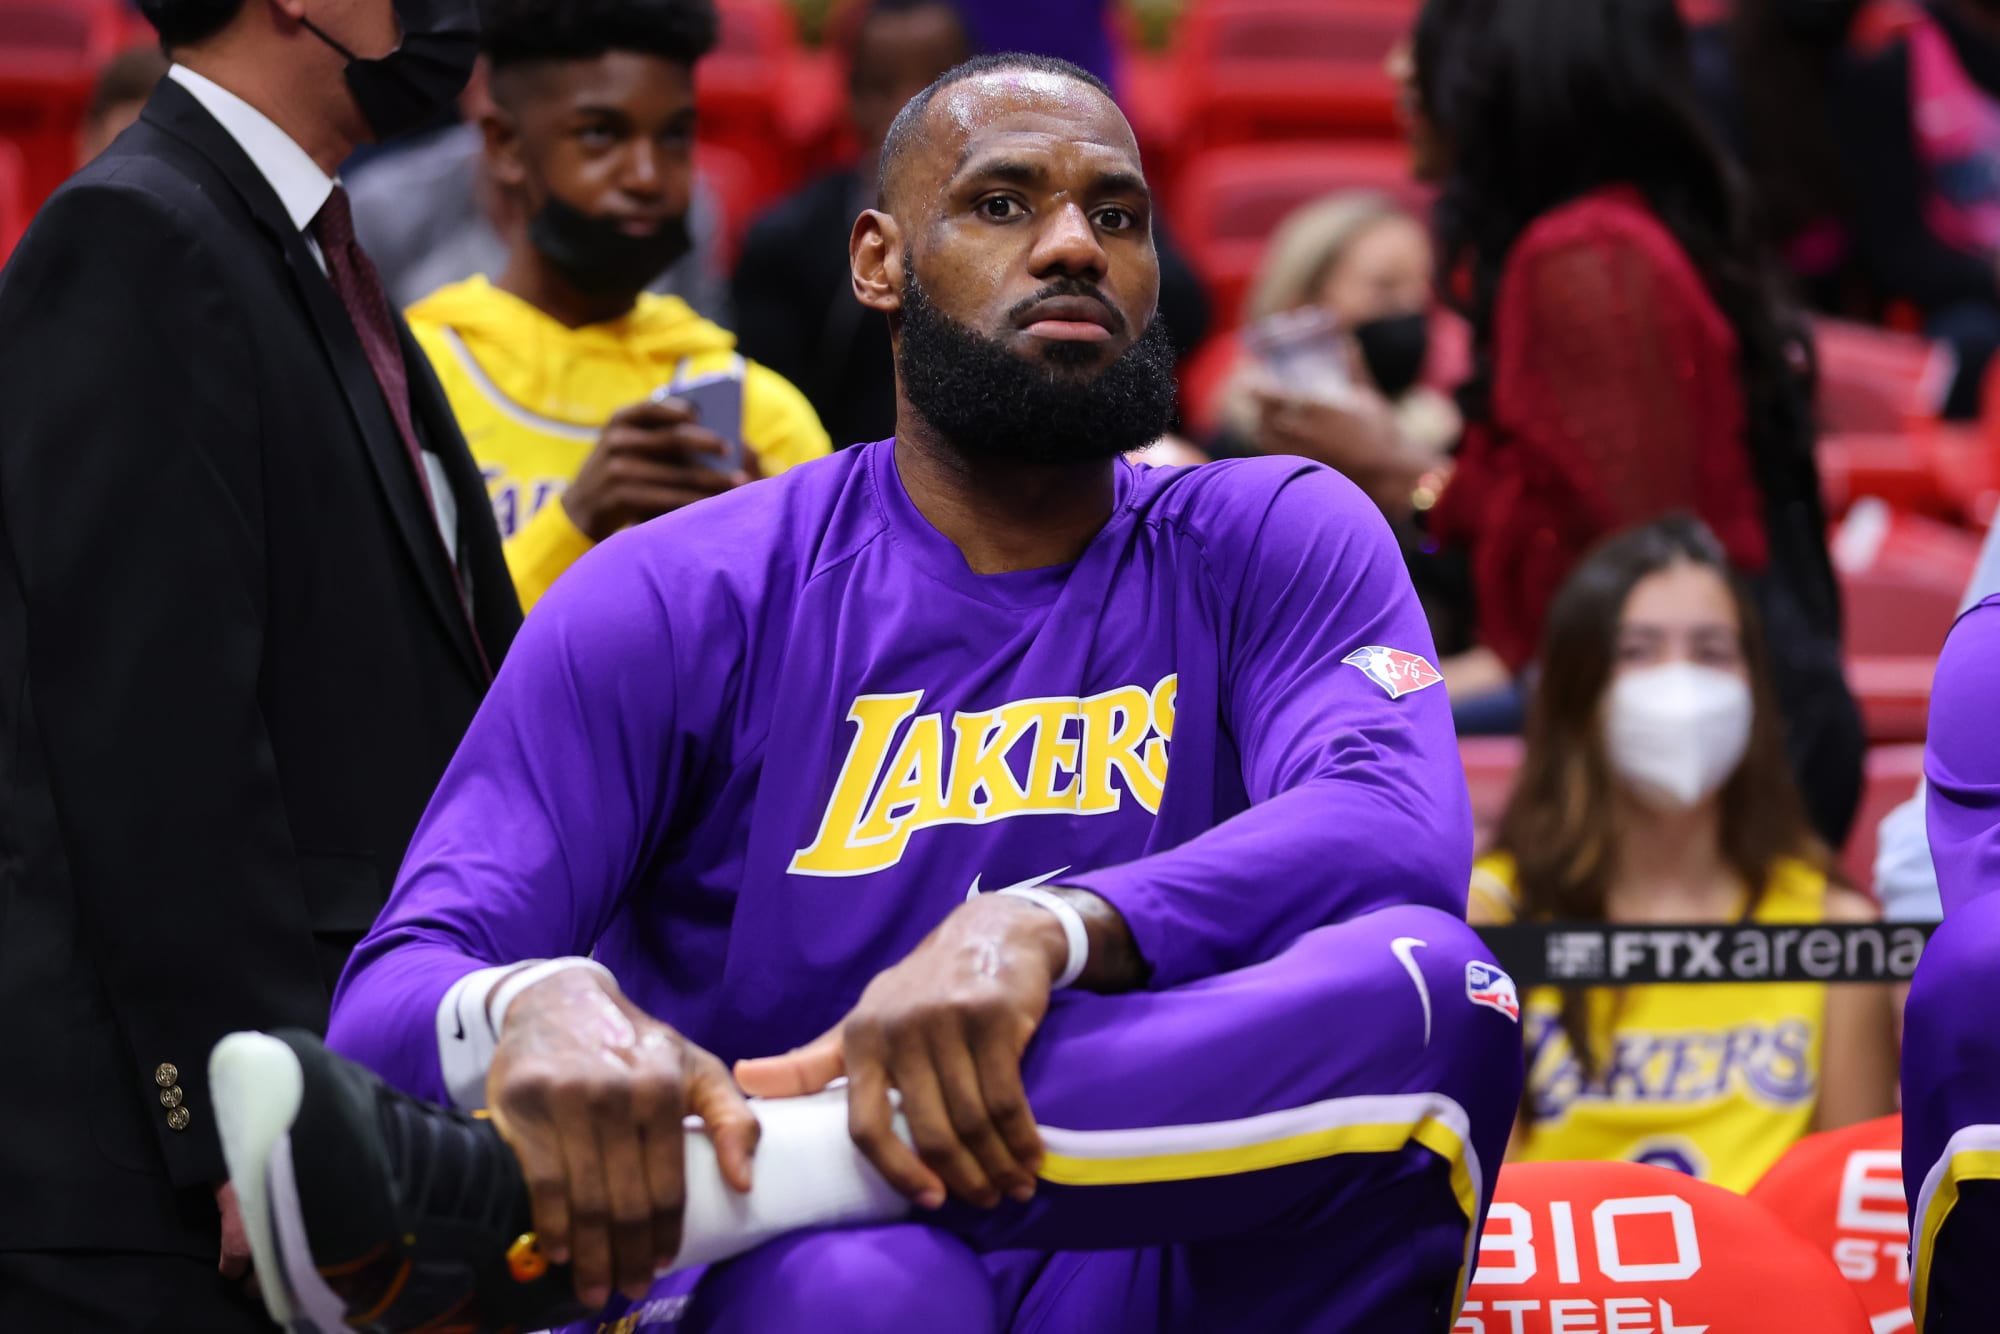 NBA insider suggests LeBron James is trying to play Lakers GM again